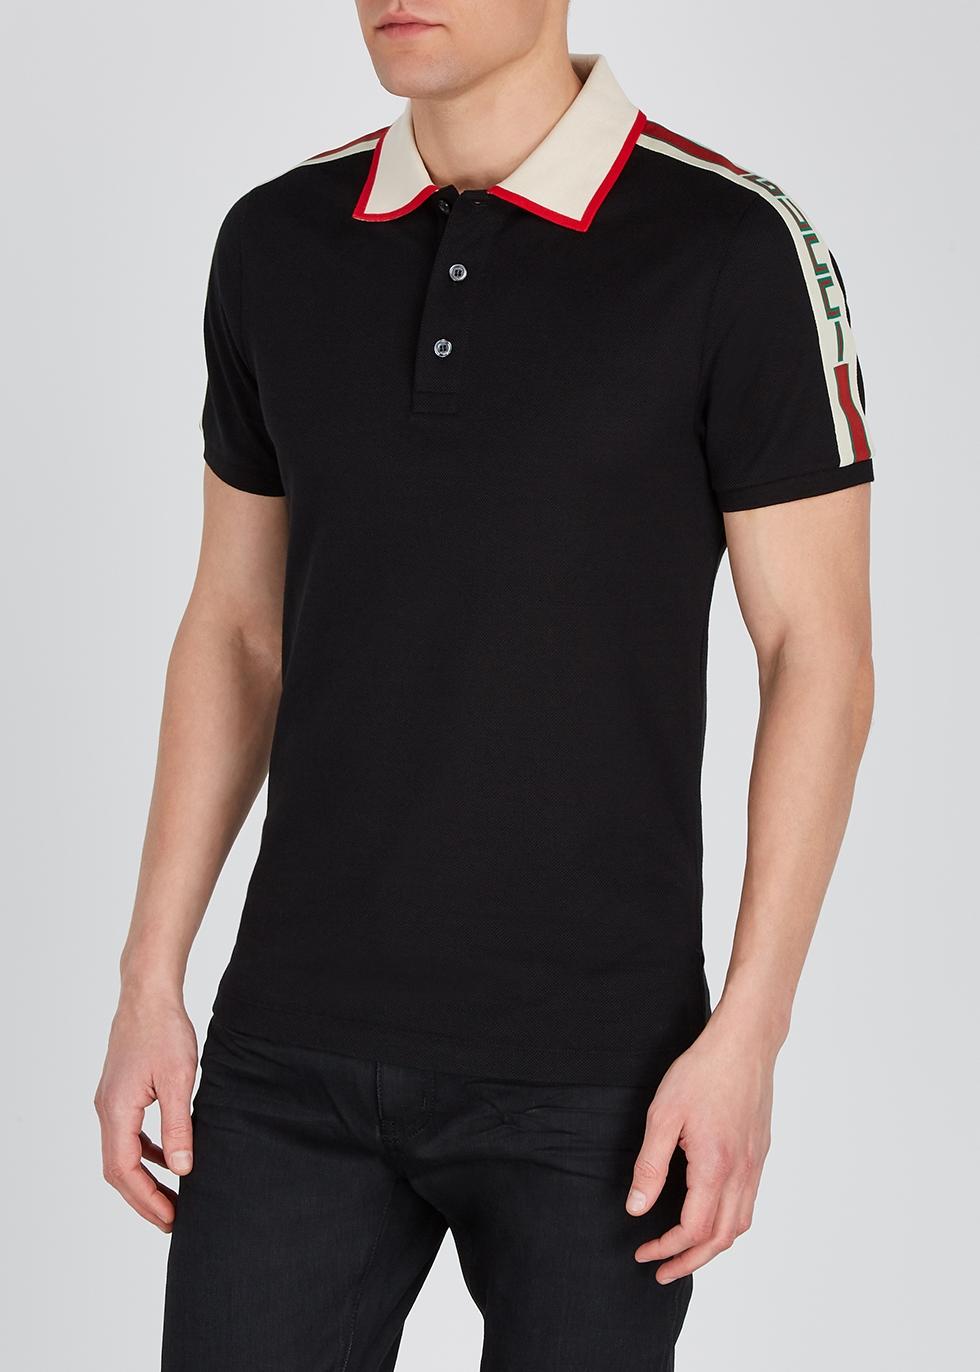 Gucci - Authenticated Polo Shirt - Black for Men, Never Worn, with Tag